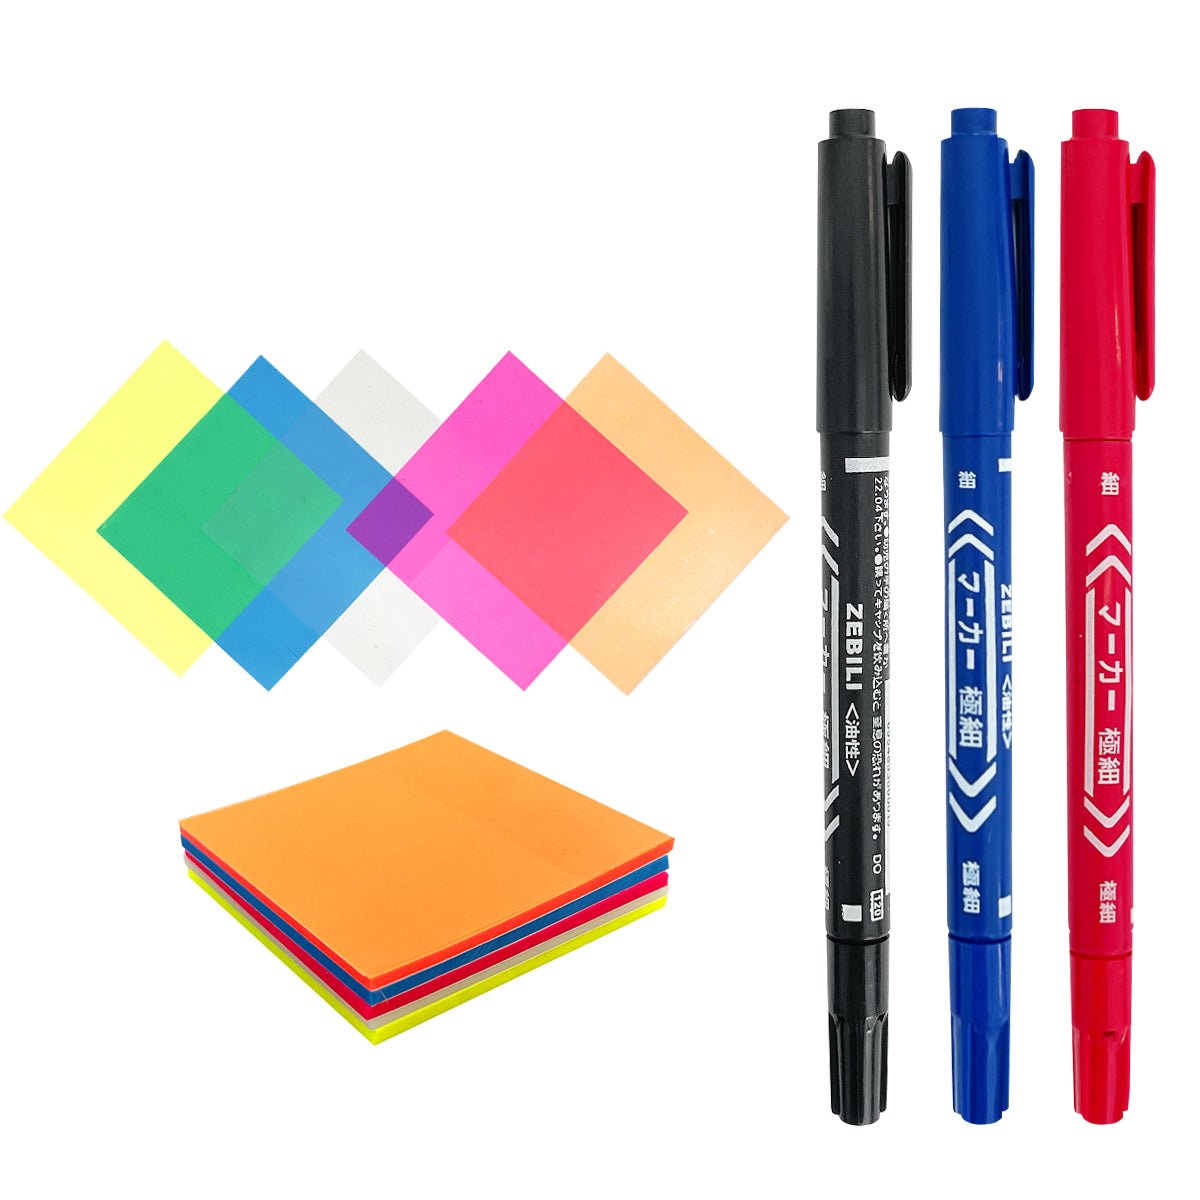 Wrapables Transparent Sticky Notes with Dual Tip Marker Pens for Home, School, Office Multicolor